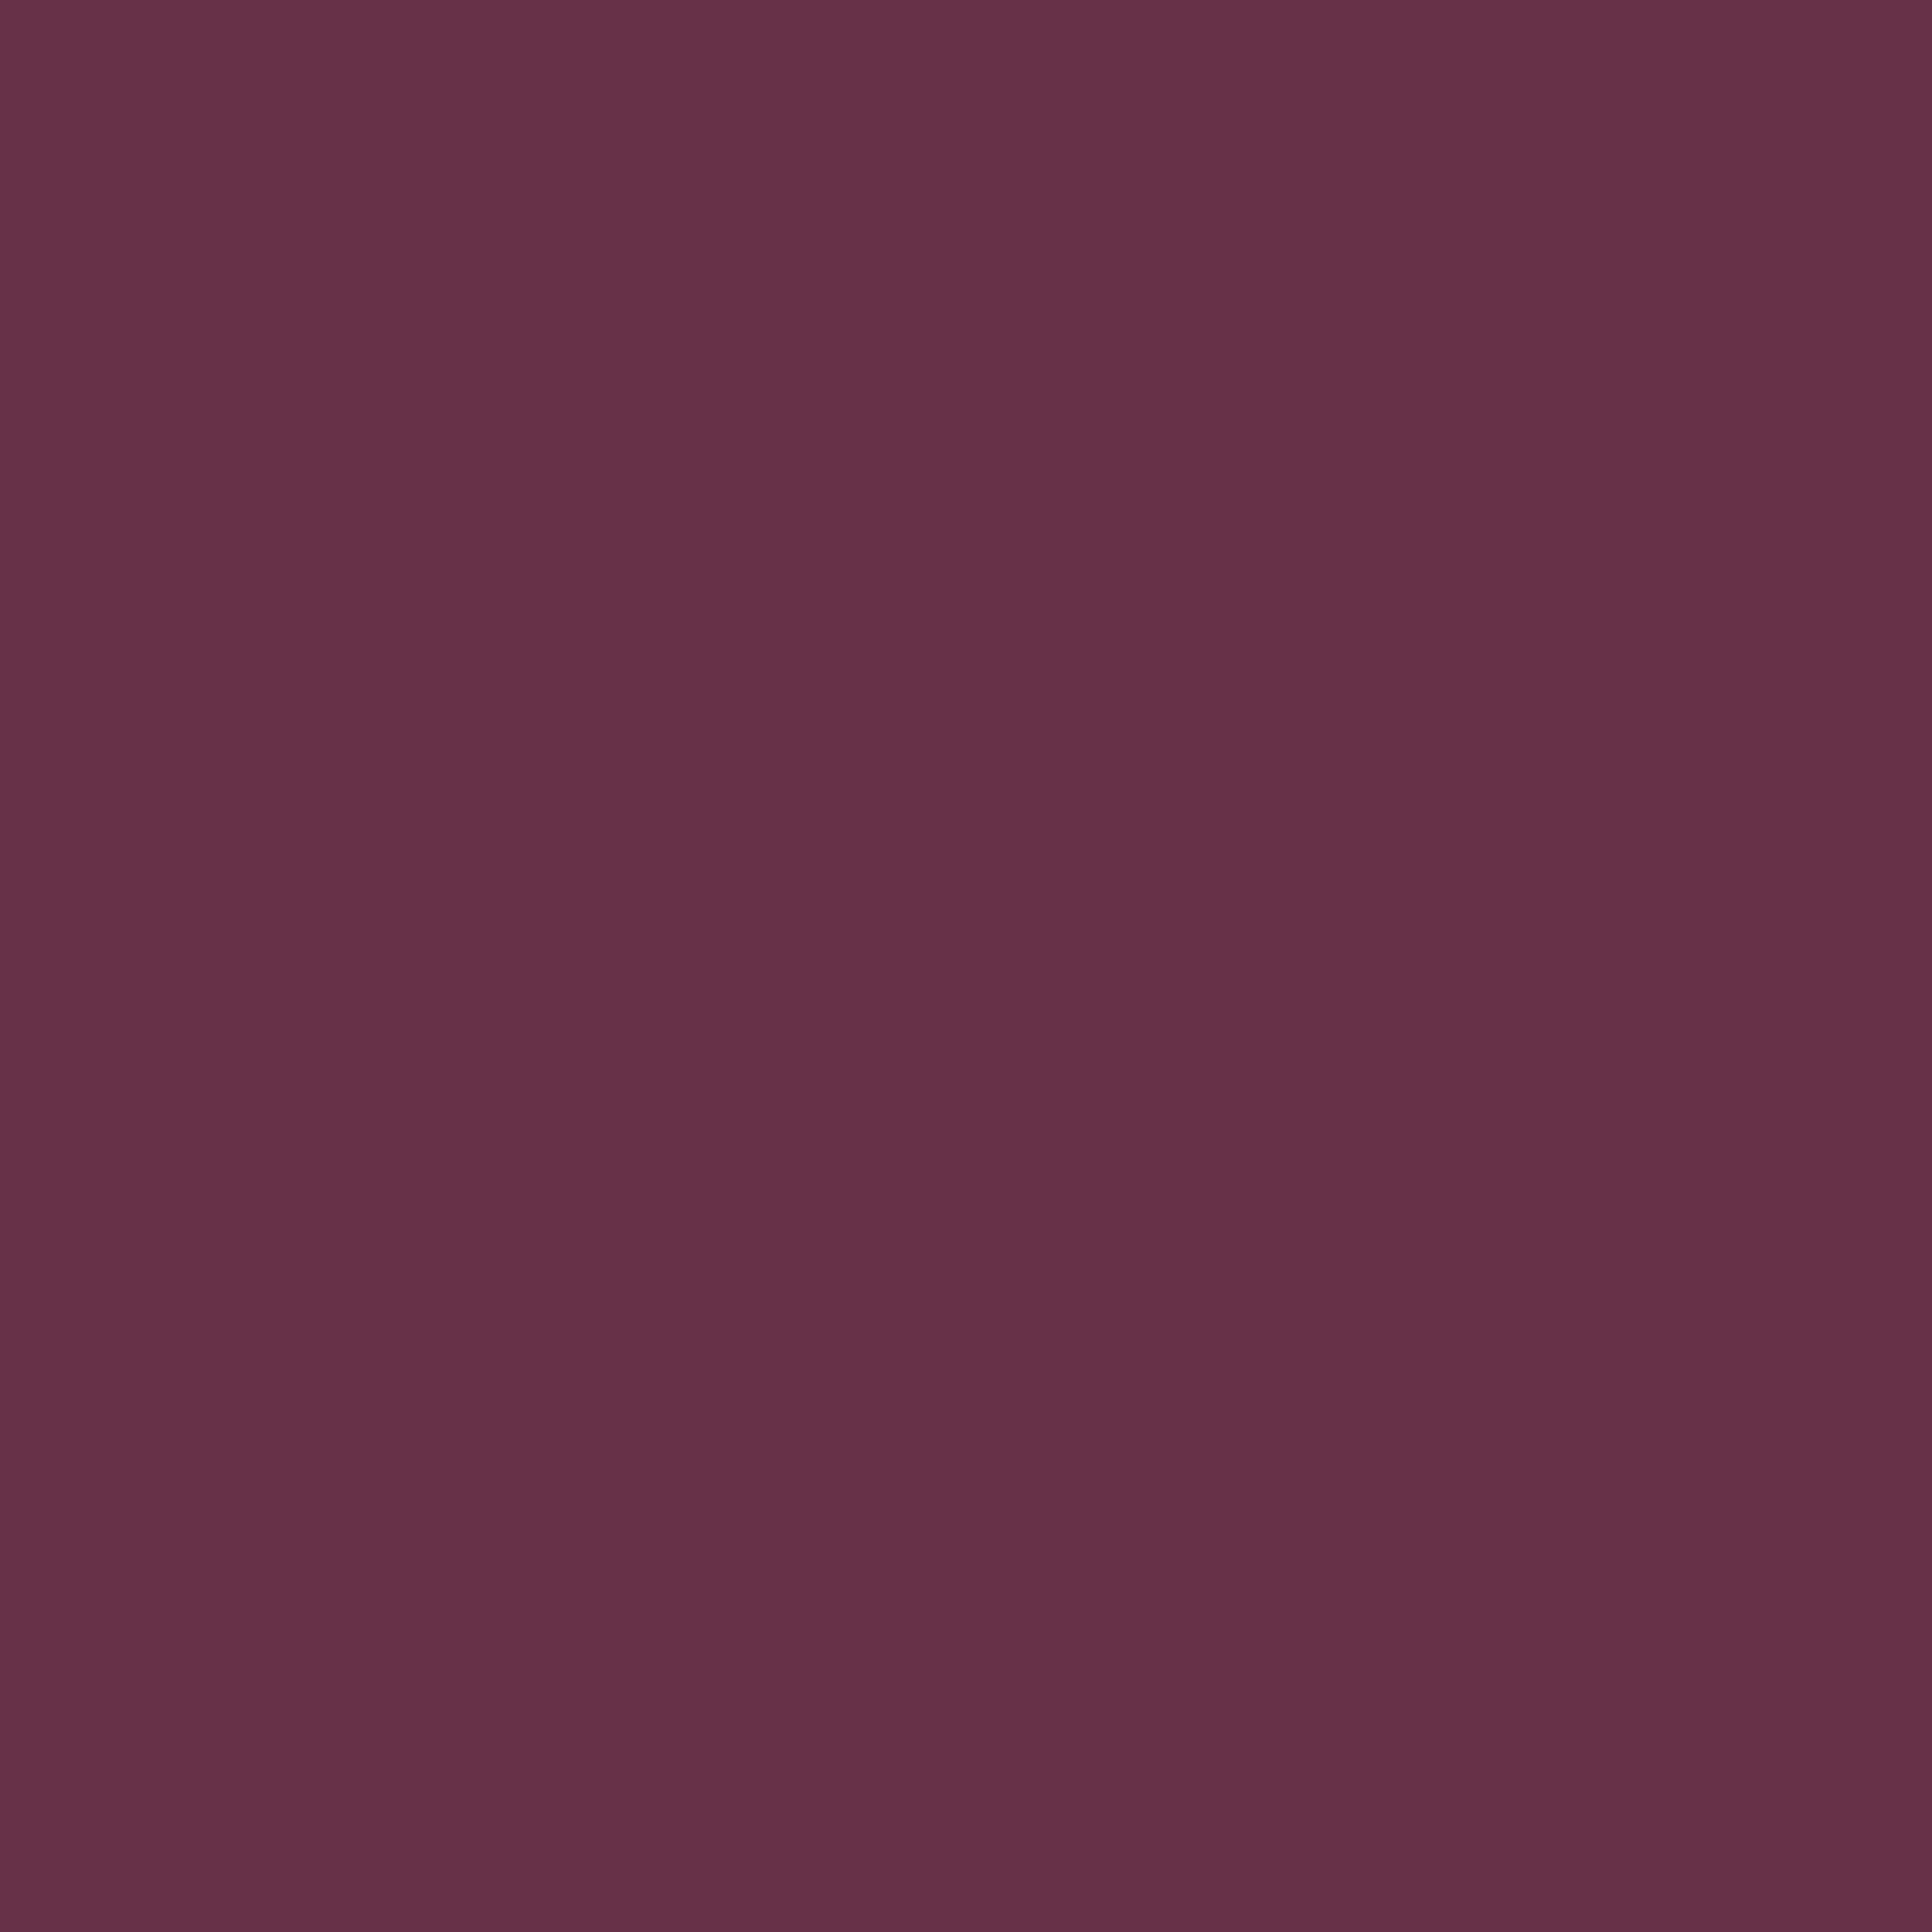 3600x3600 Wine Dregs Solid Color Background